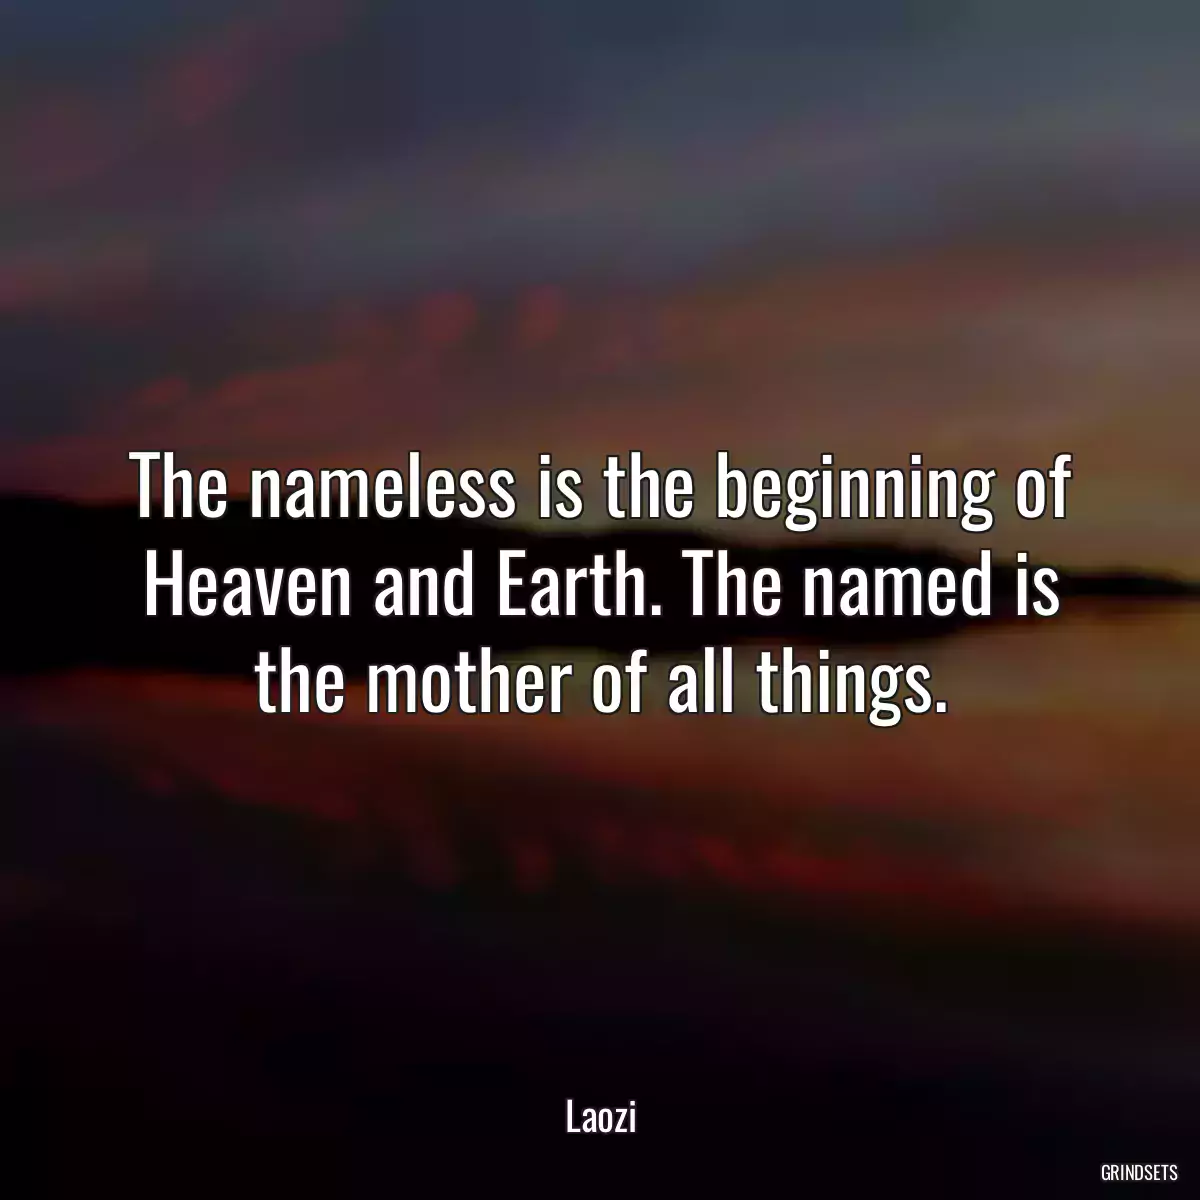 The nameless is the beginning of Heaven and Earth. The named is the mother of all things.